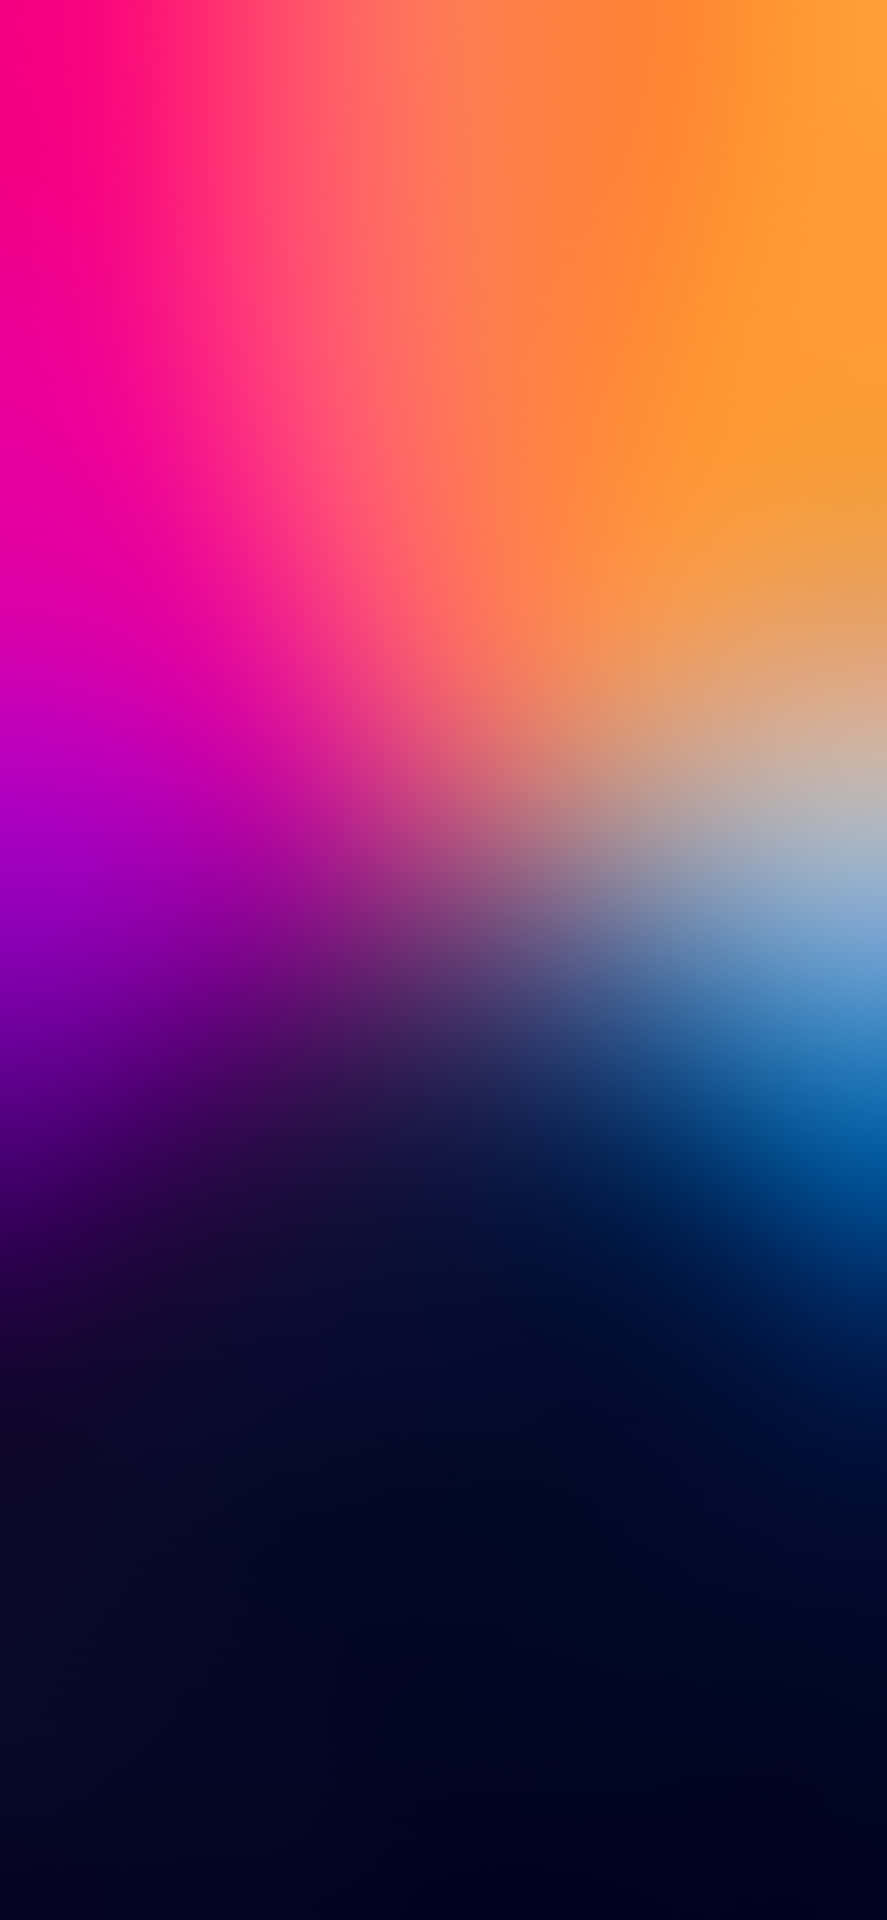 Download Sleek And Sophisticated Iphone 12 Pro Max | Wallpapers.com